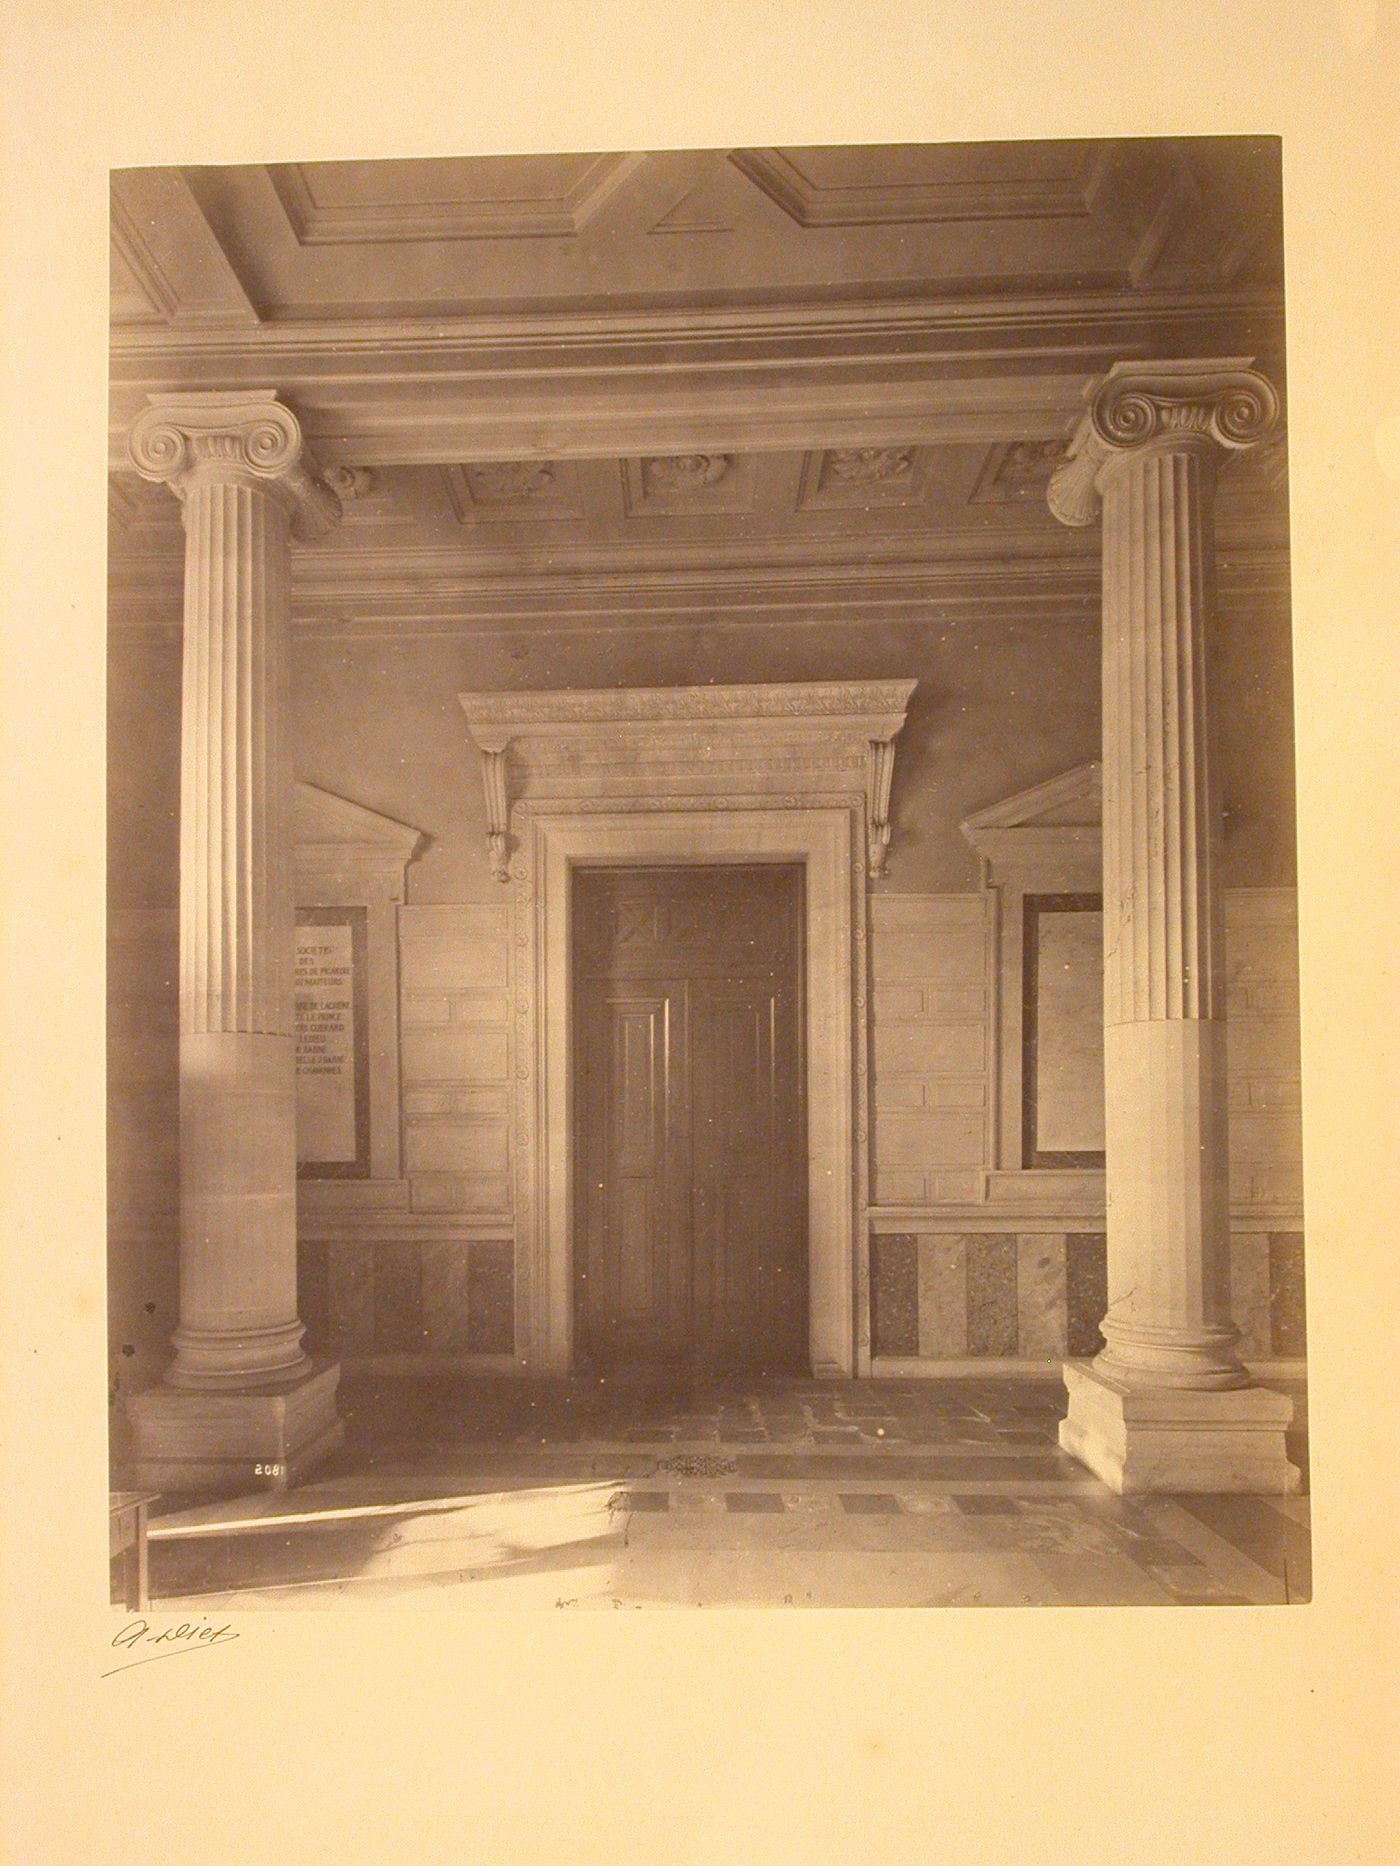 Musée d'Amiens: Lobby, view with column and door, Amiens, France